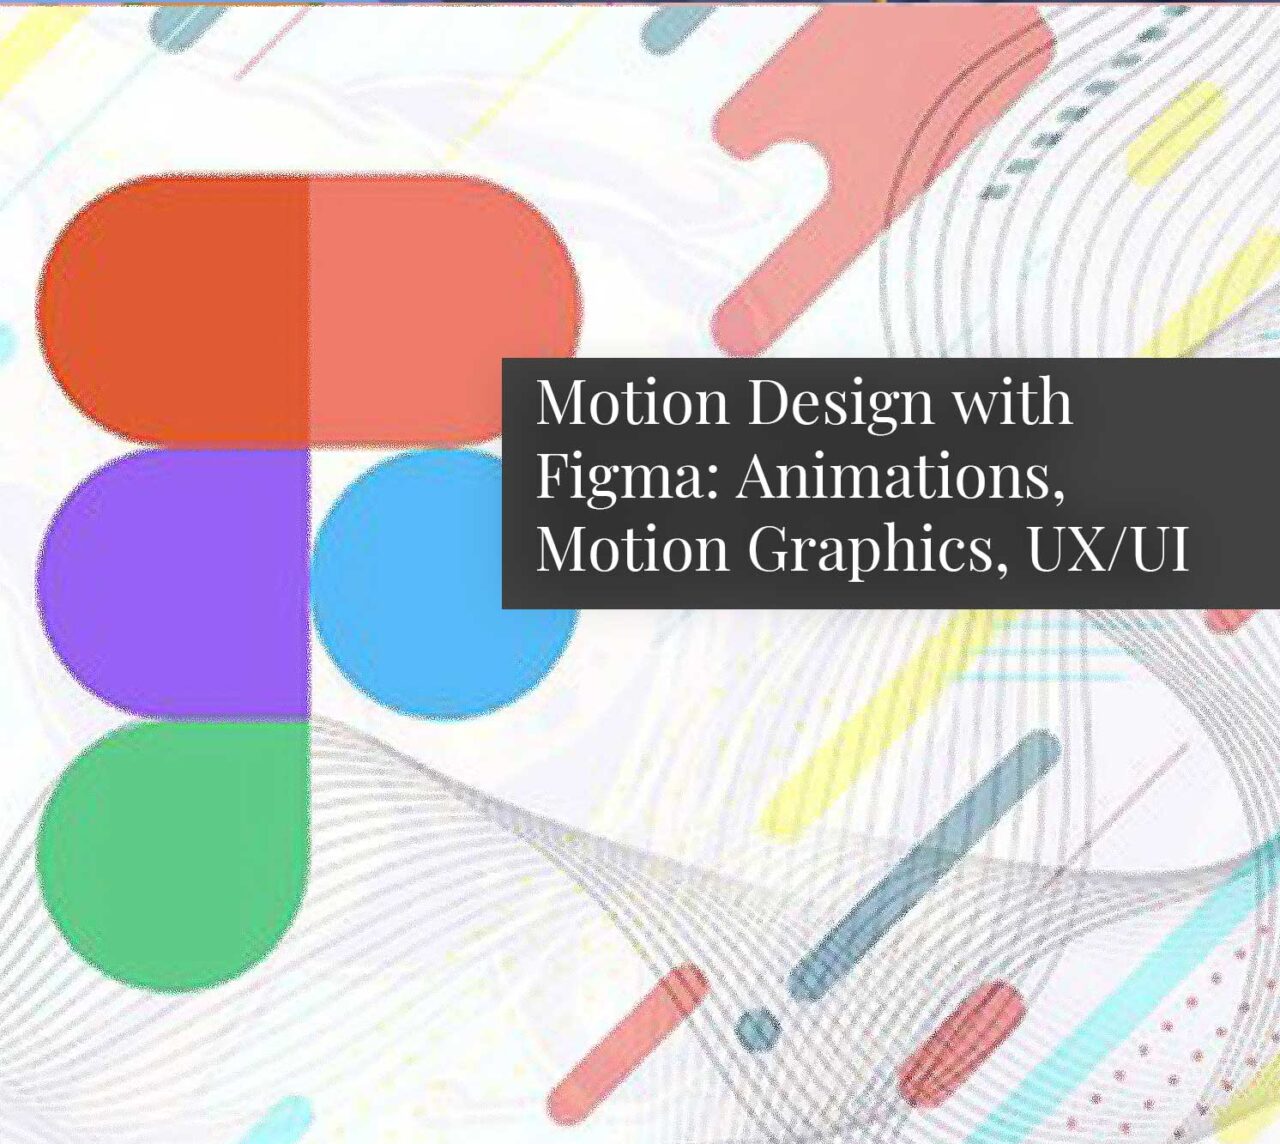 Motion Design with Figma: Animations, Motion Graphics, UX/UI